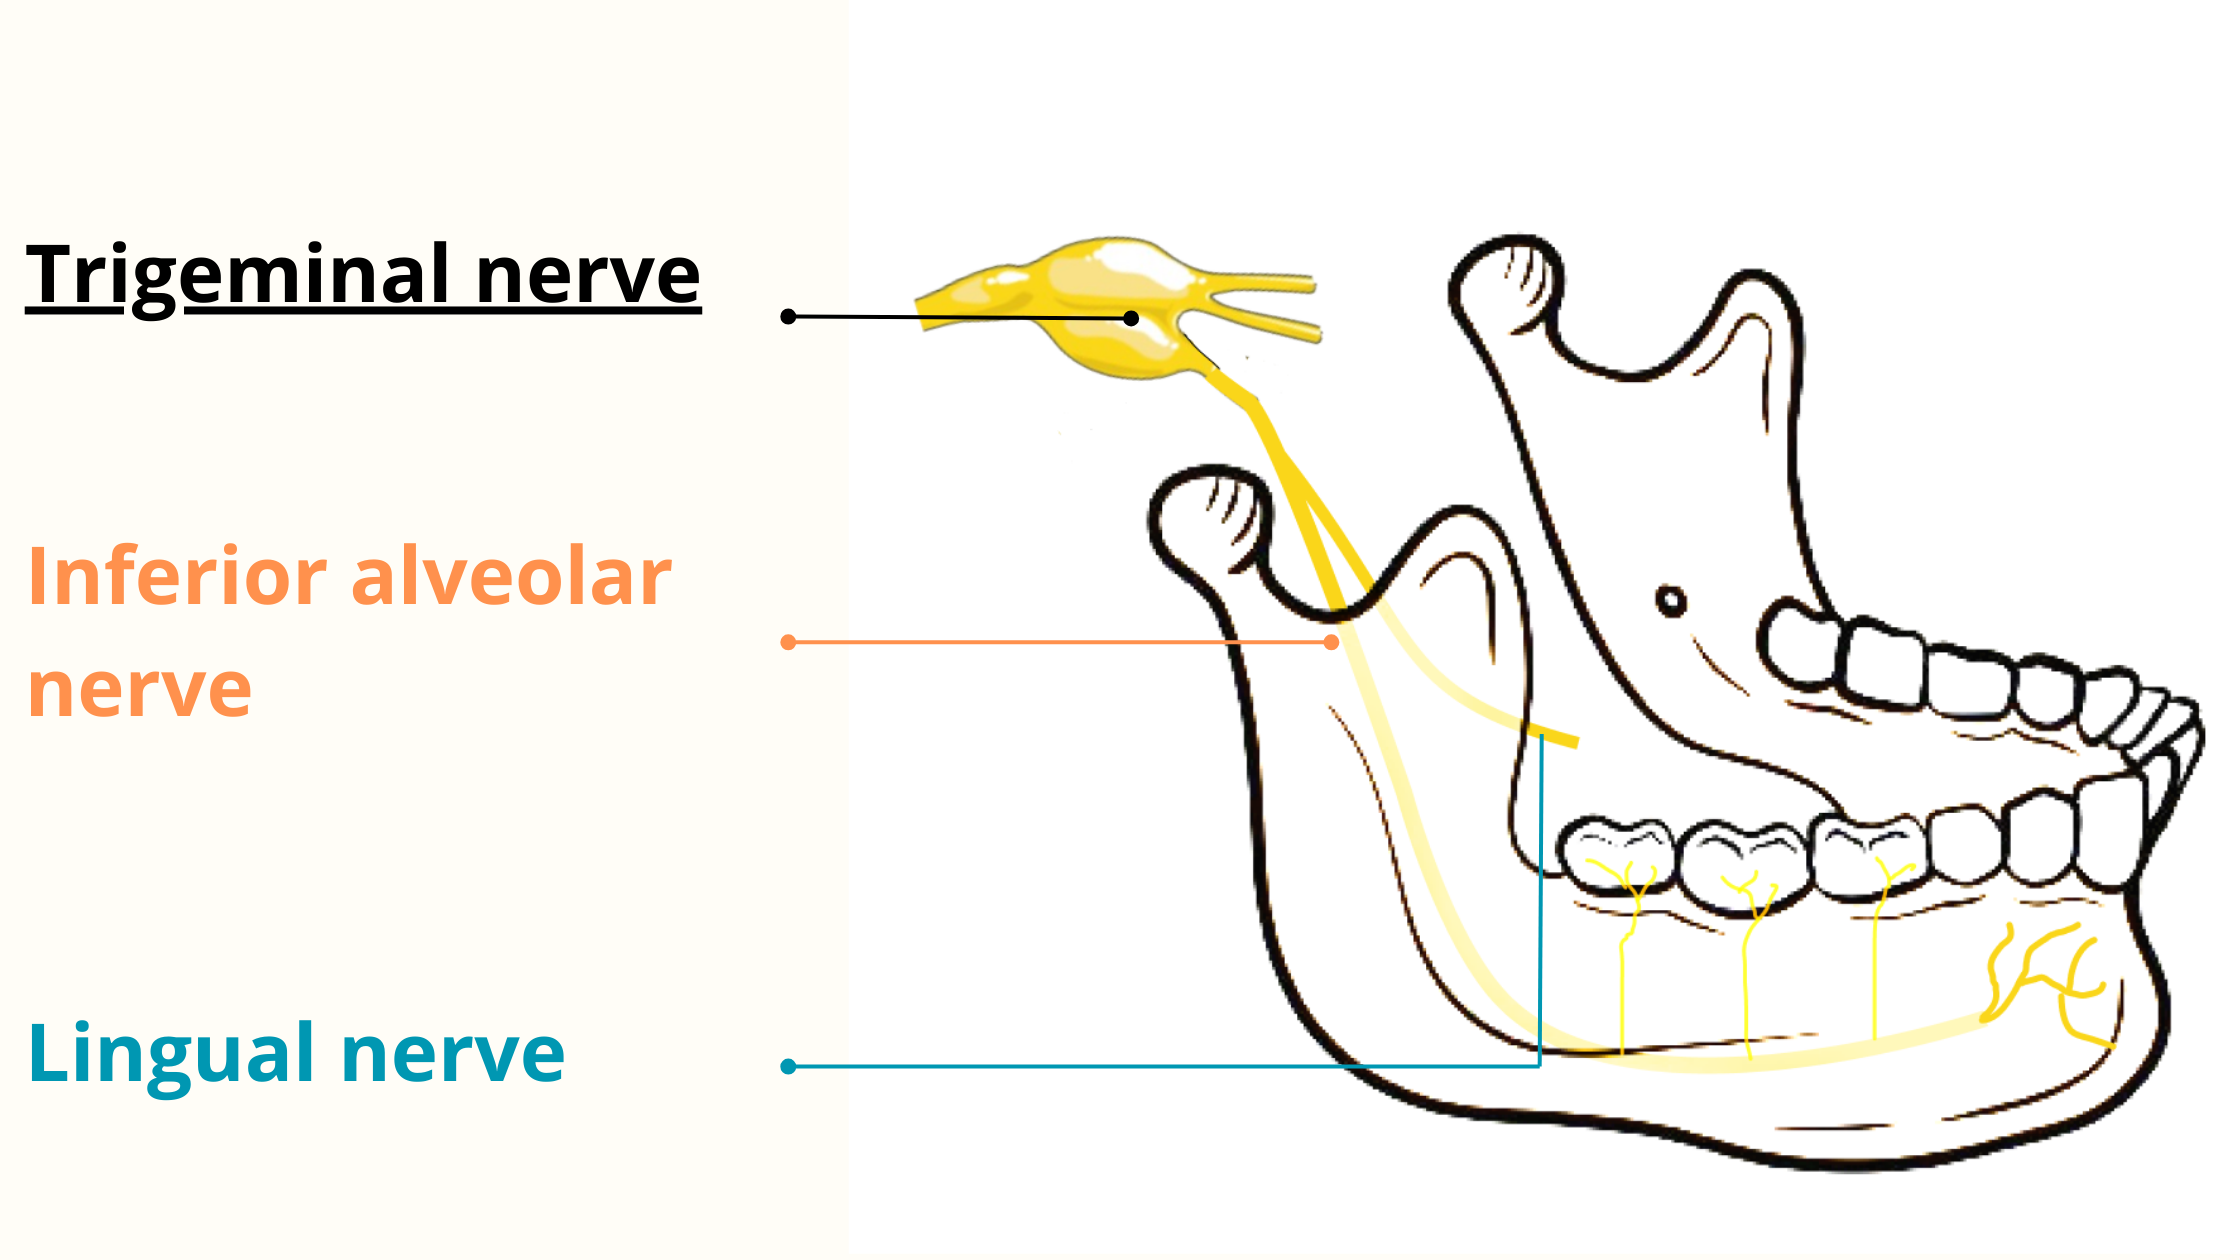 Innervation of the lower jaw: the ligual nerve and inferior alveolar nerve branch off from the trigeminal nerve to supply the lower jaw.